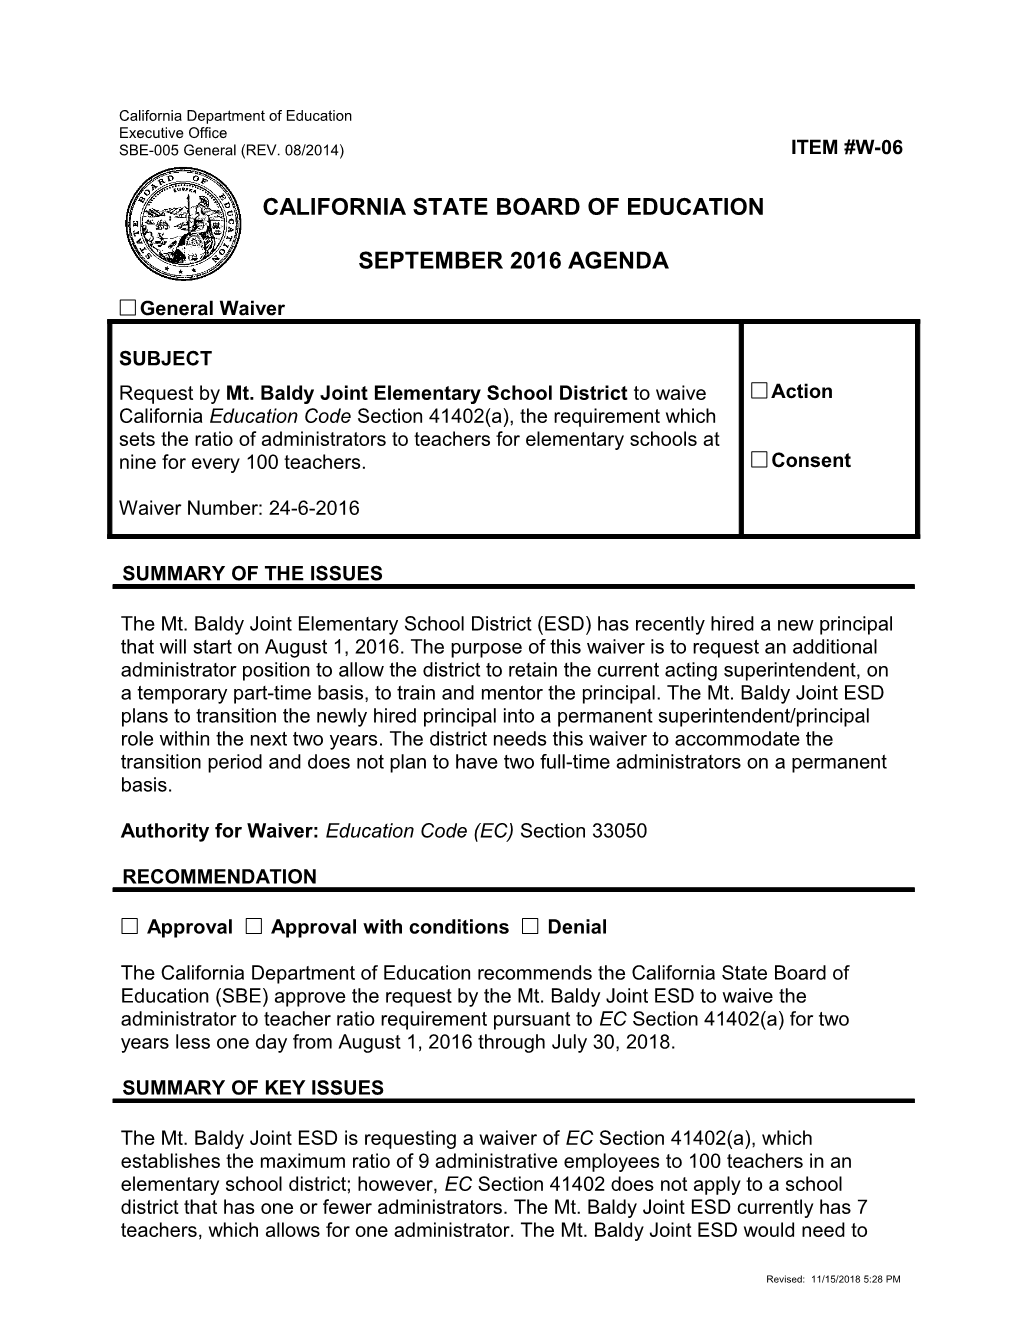 September 2016 Waiver Item W-06 - Meeting Agendas (CA State Board of Education)